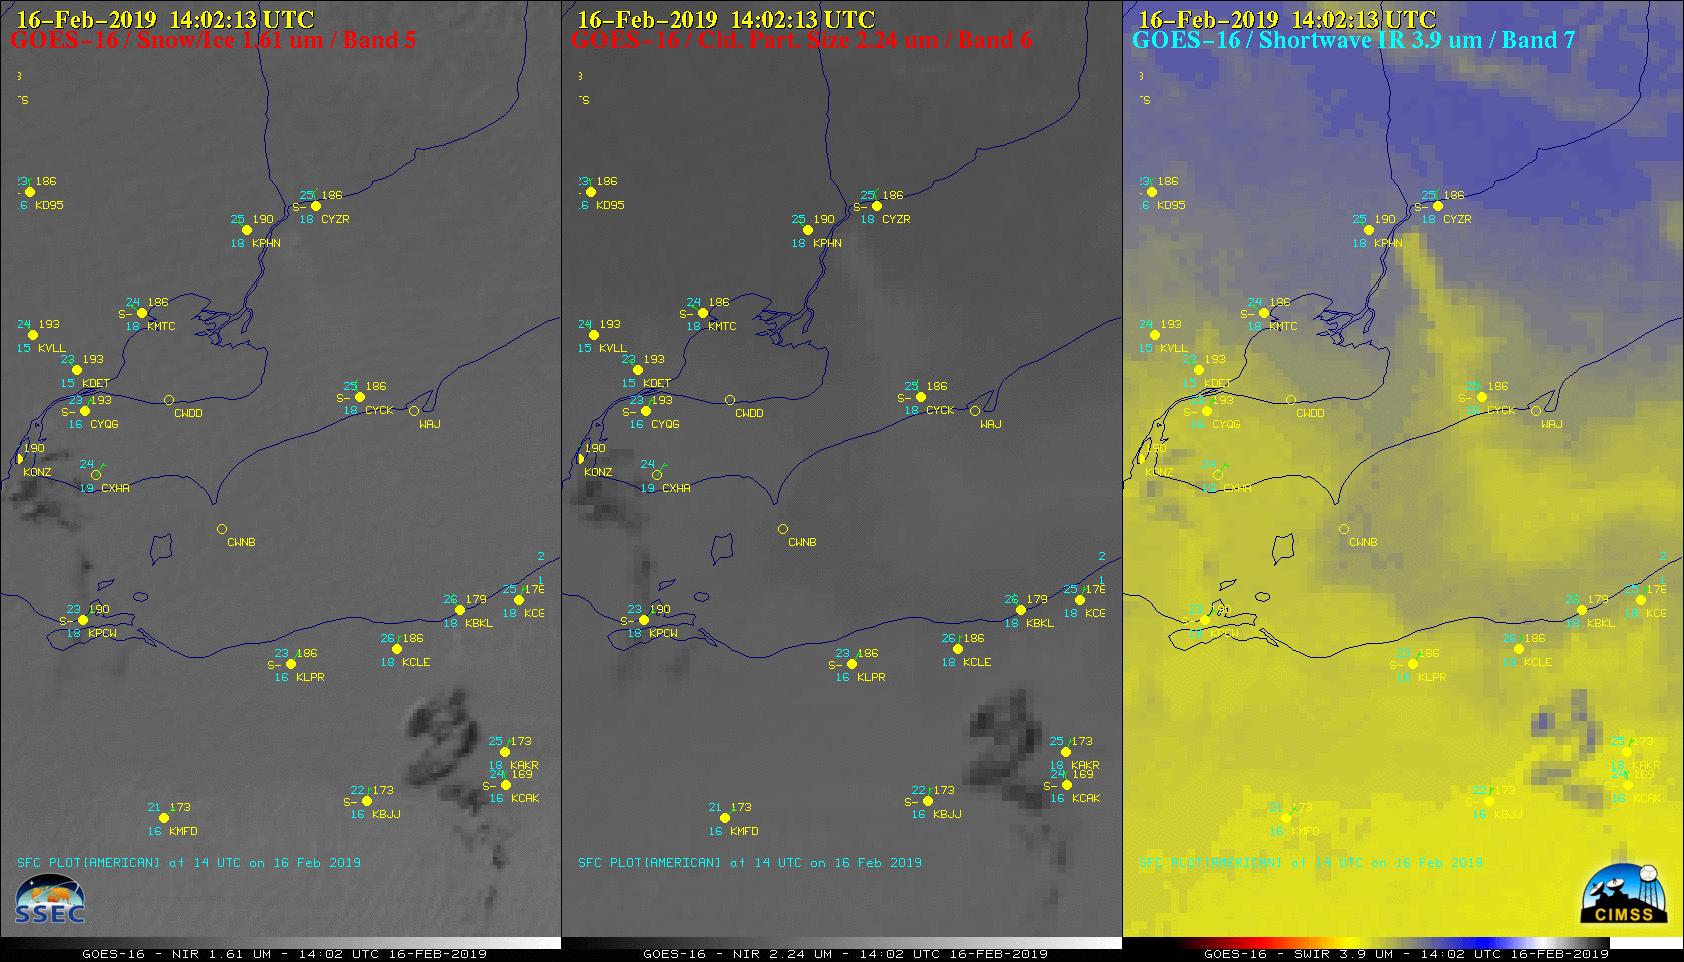 GOES-16 Near-Infrared "Snow/Ice" (1.61 µm, left) and Near-Infrared "Cloud Particle Size" (2.24 µm, center) and Shortwave Infrared (3.9 µm, right) images [click to play animation | MP4]